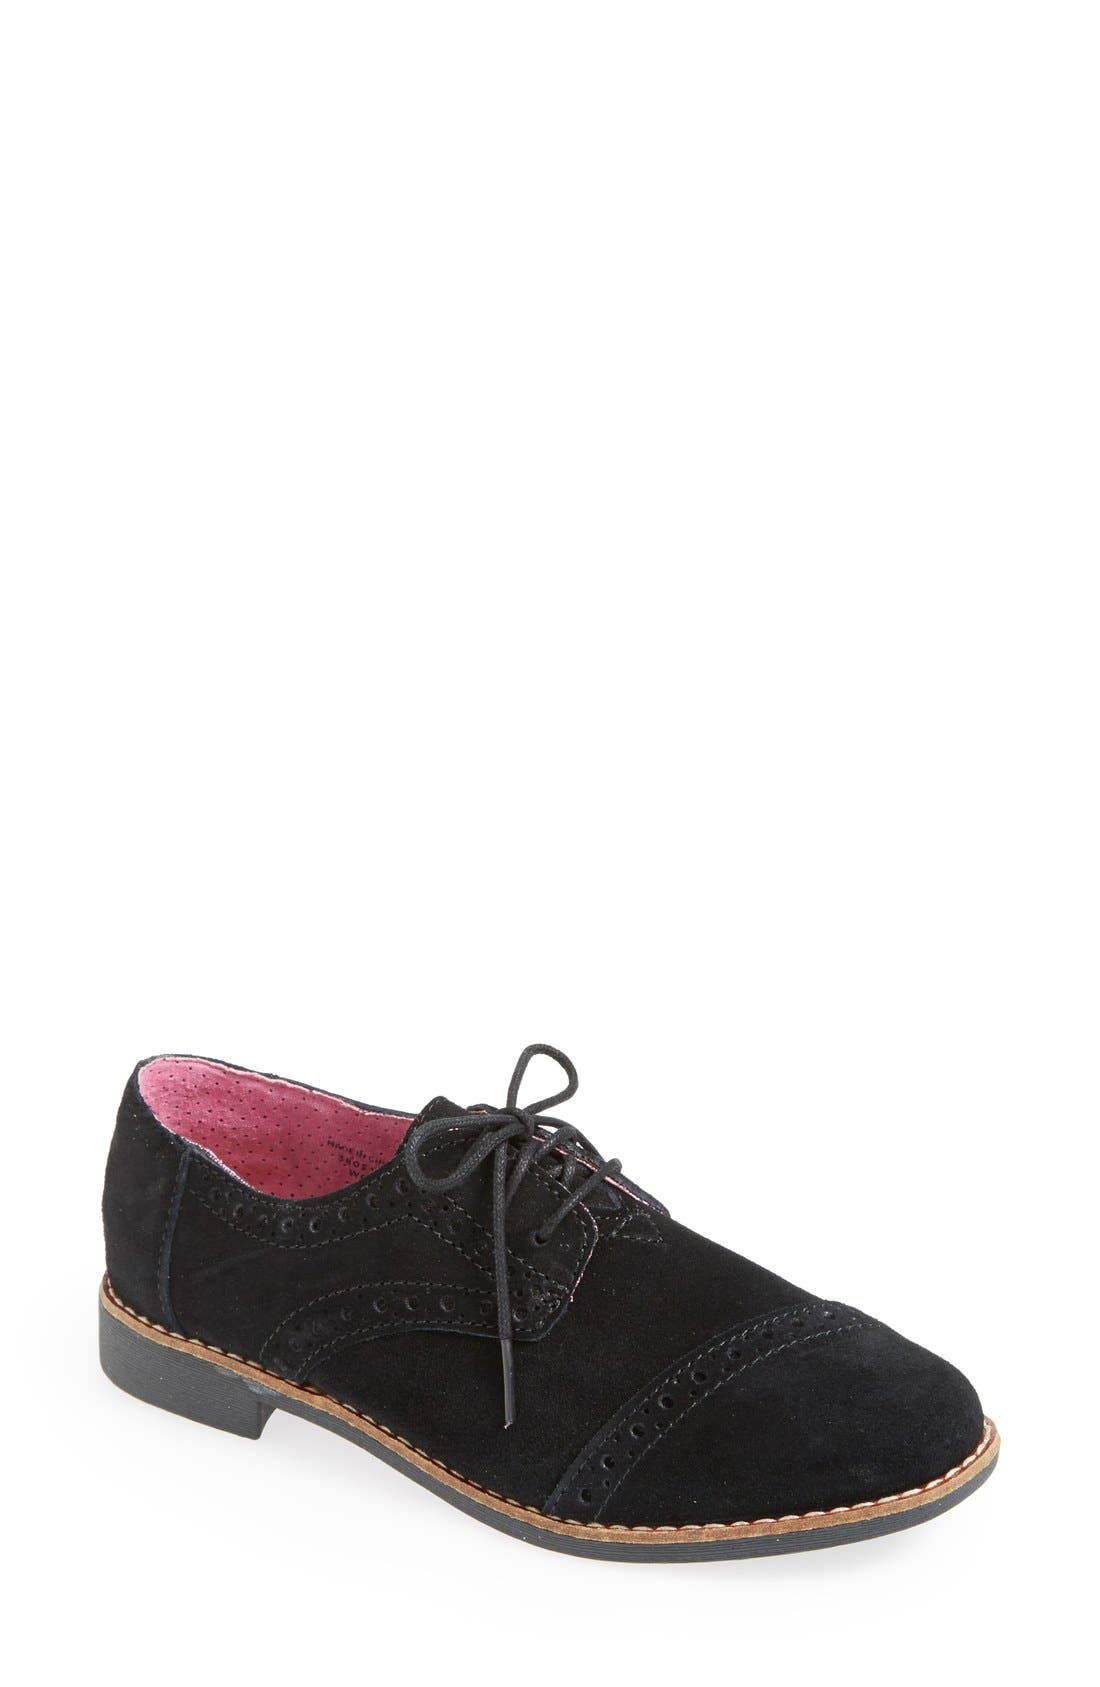 toms brogues womens